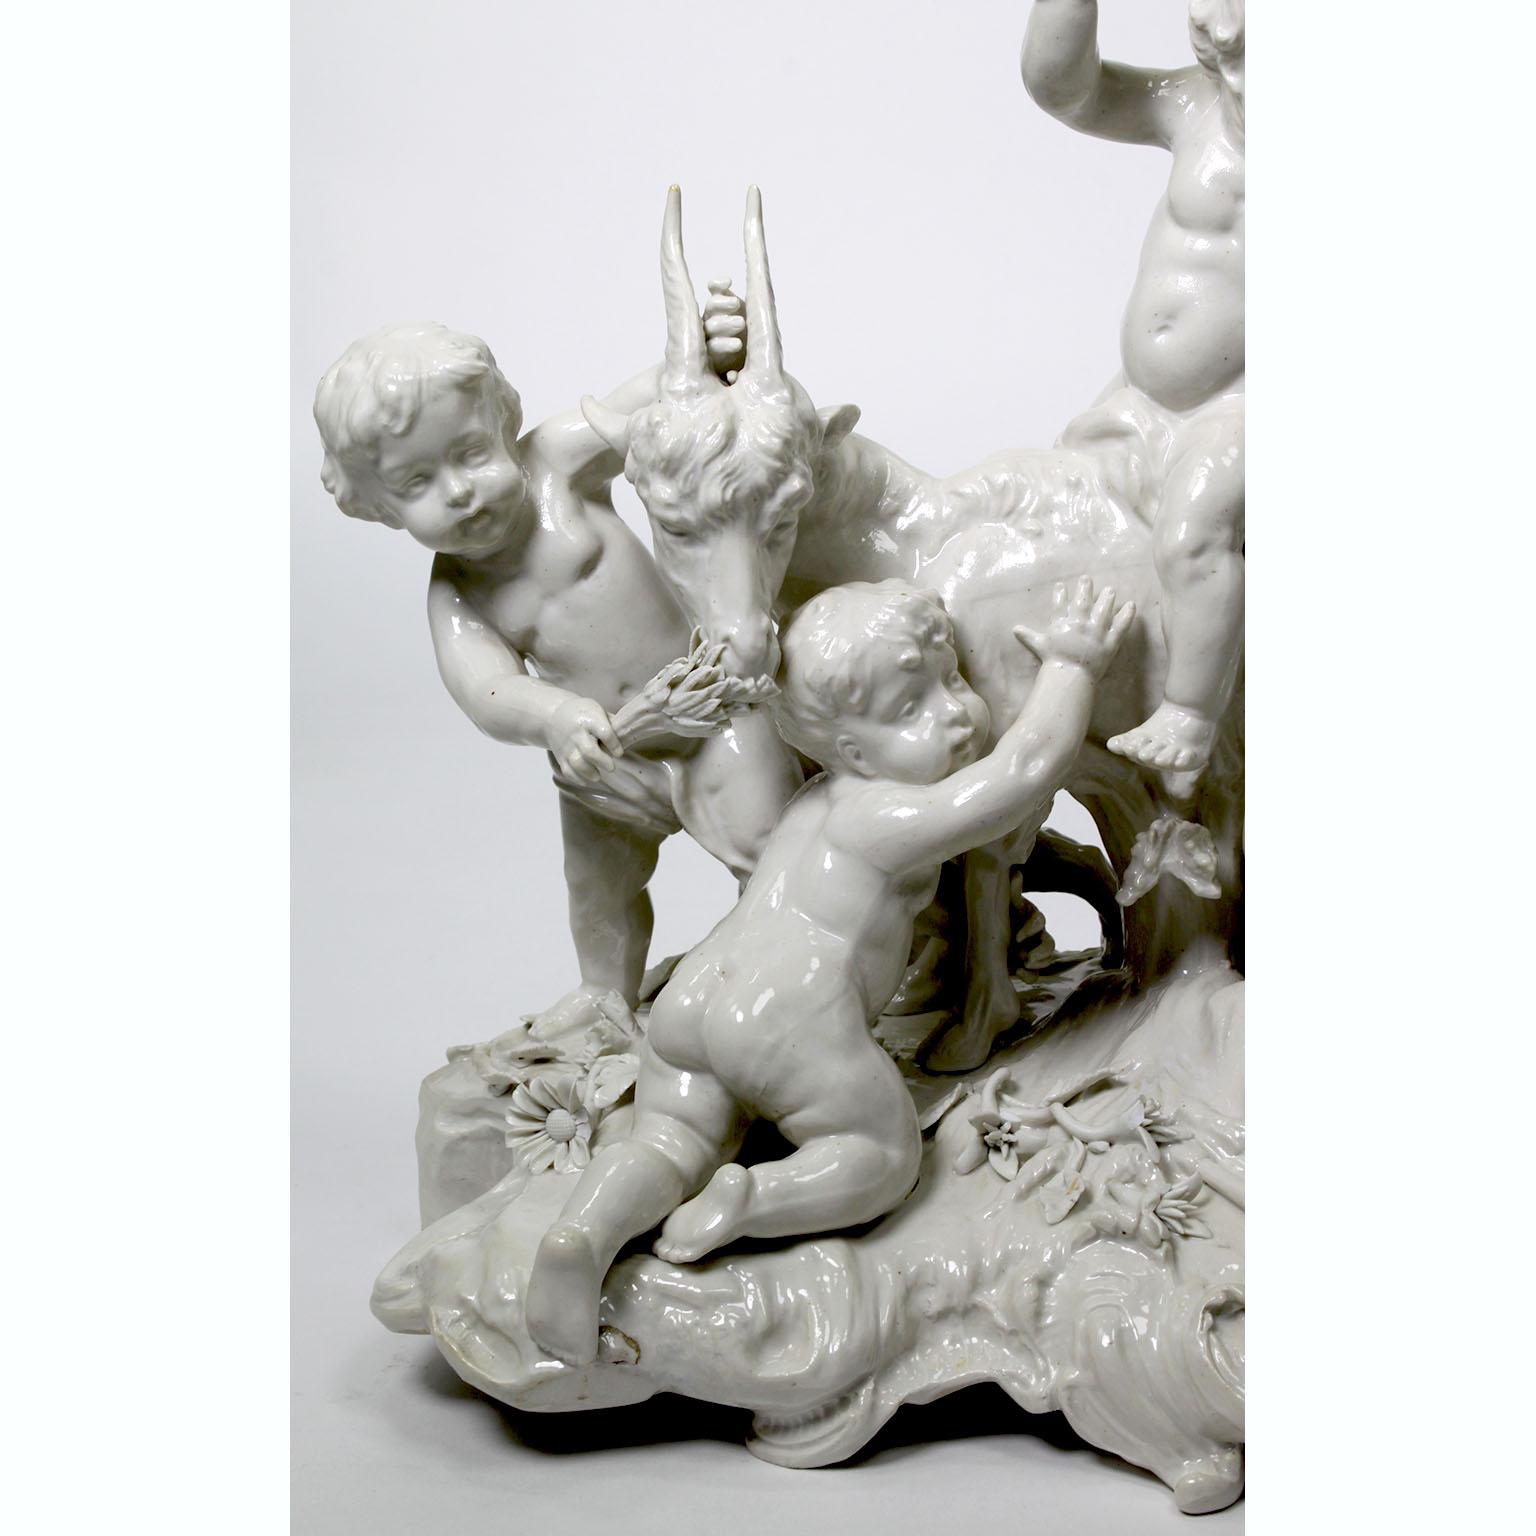 A charming Continental 19th/20th century whimsical white glazed porcelain group of four putti playing with a goat, probably after the depiction of The Goat Amalthea with the Infant Jupiter by the Italian artist Gian Lorenzo Bernini, (Italian,